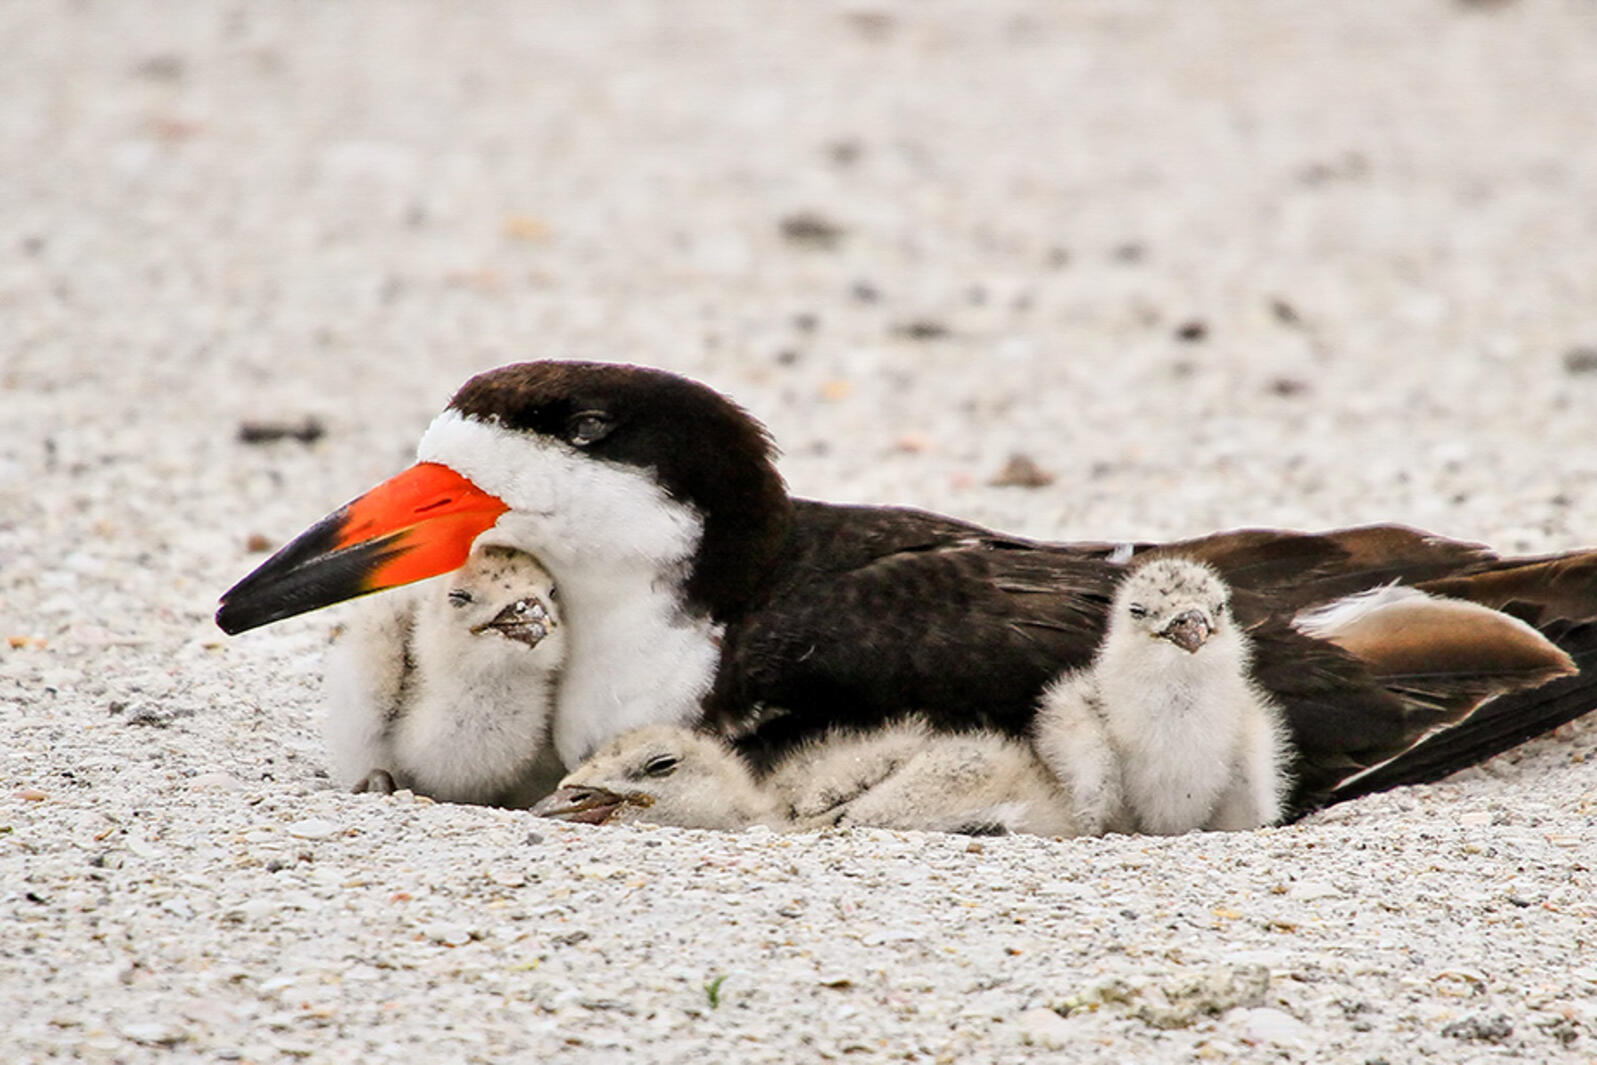 Black Skimmer laying on the sand with fuzzy chicks under its body.